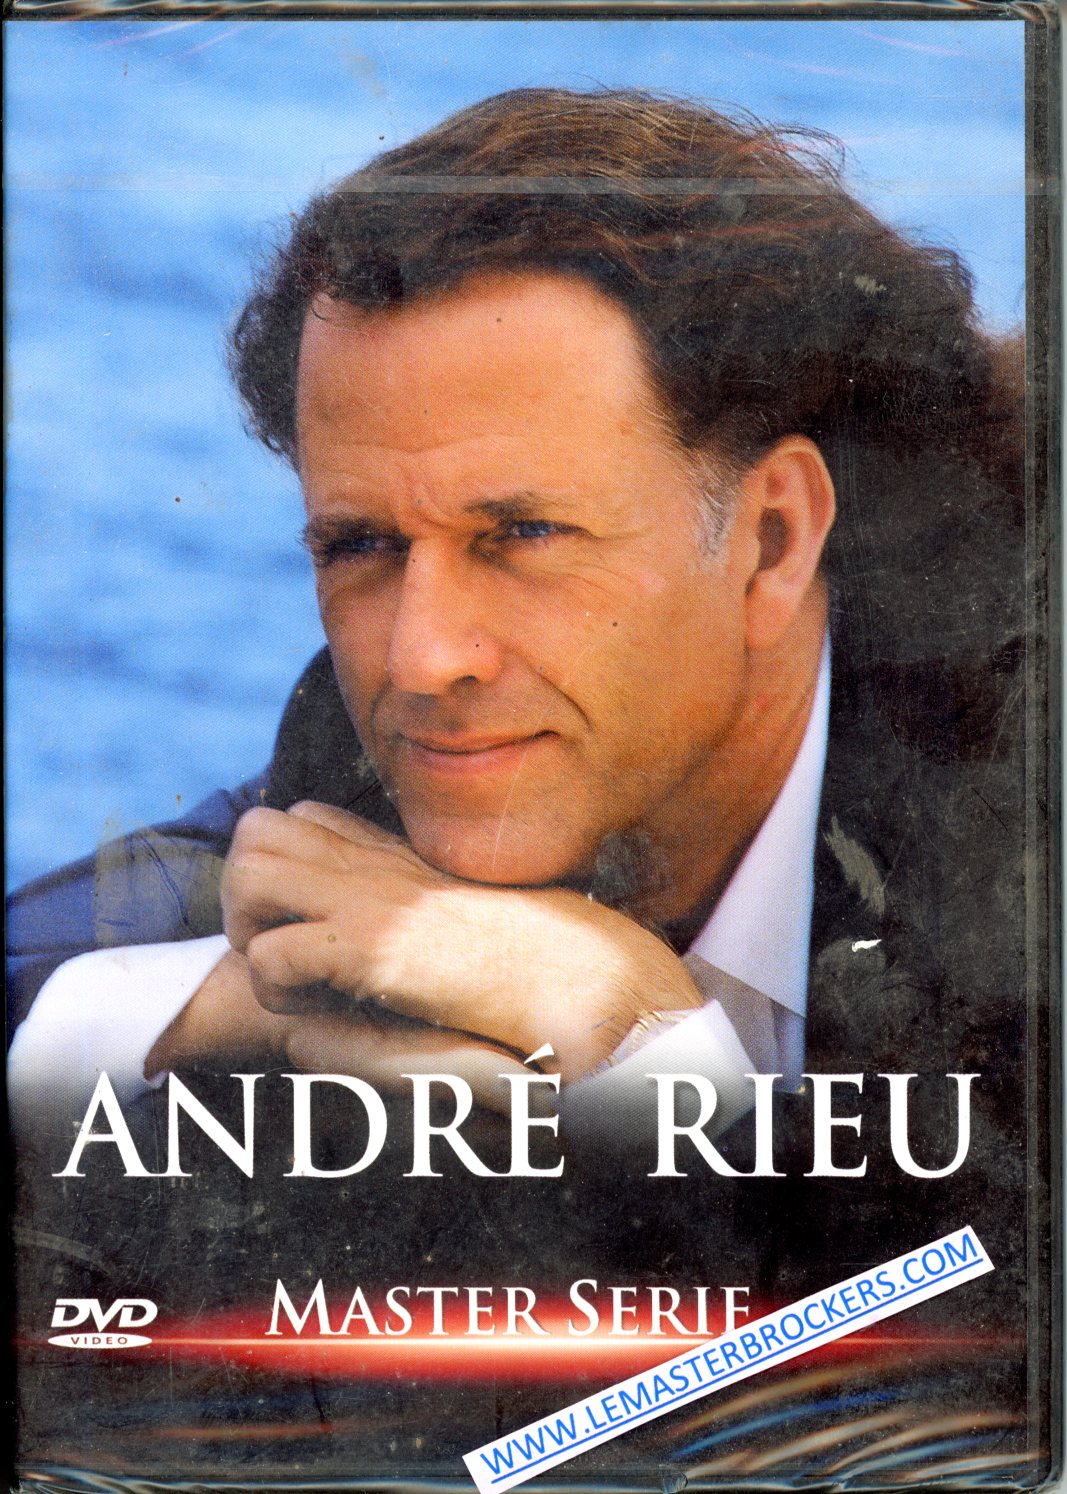 ANDRE RIEU - MASTER SERIE